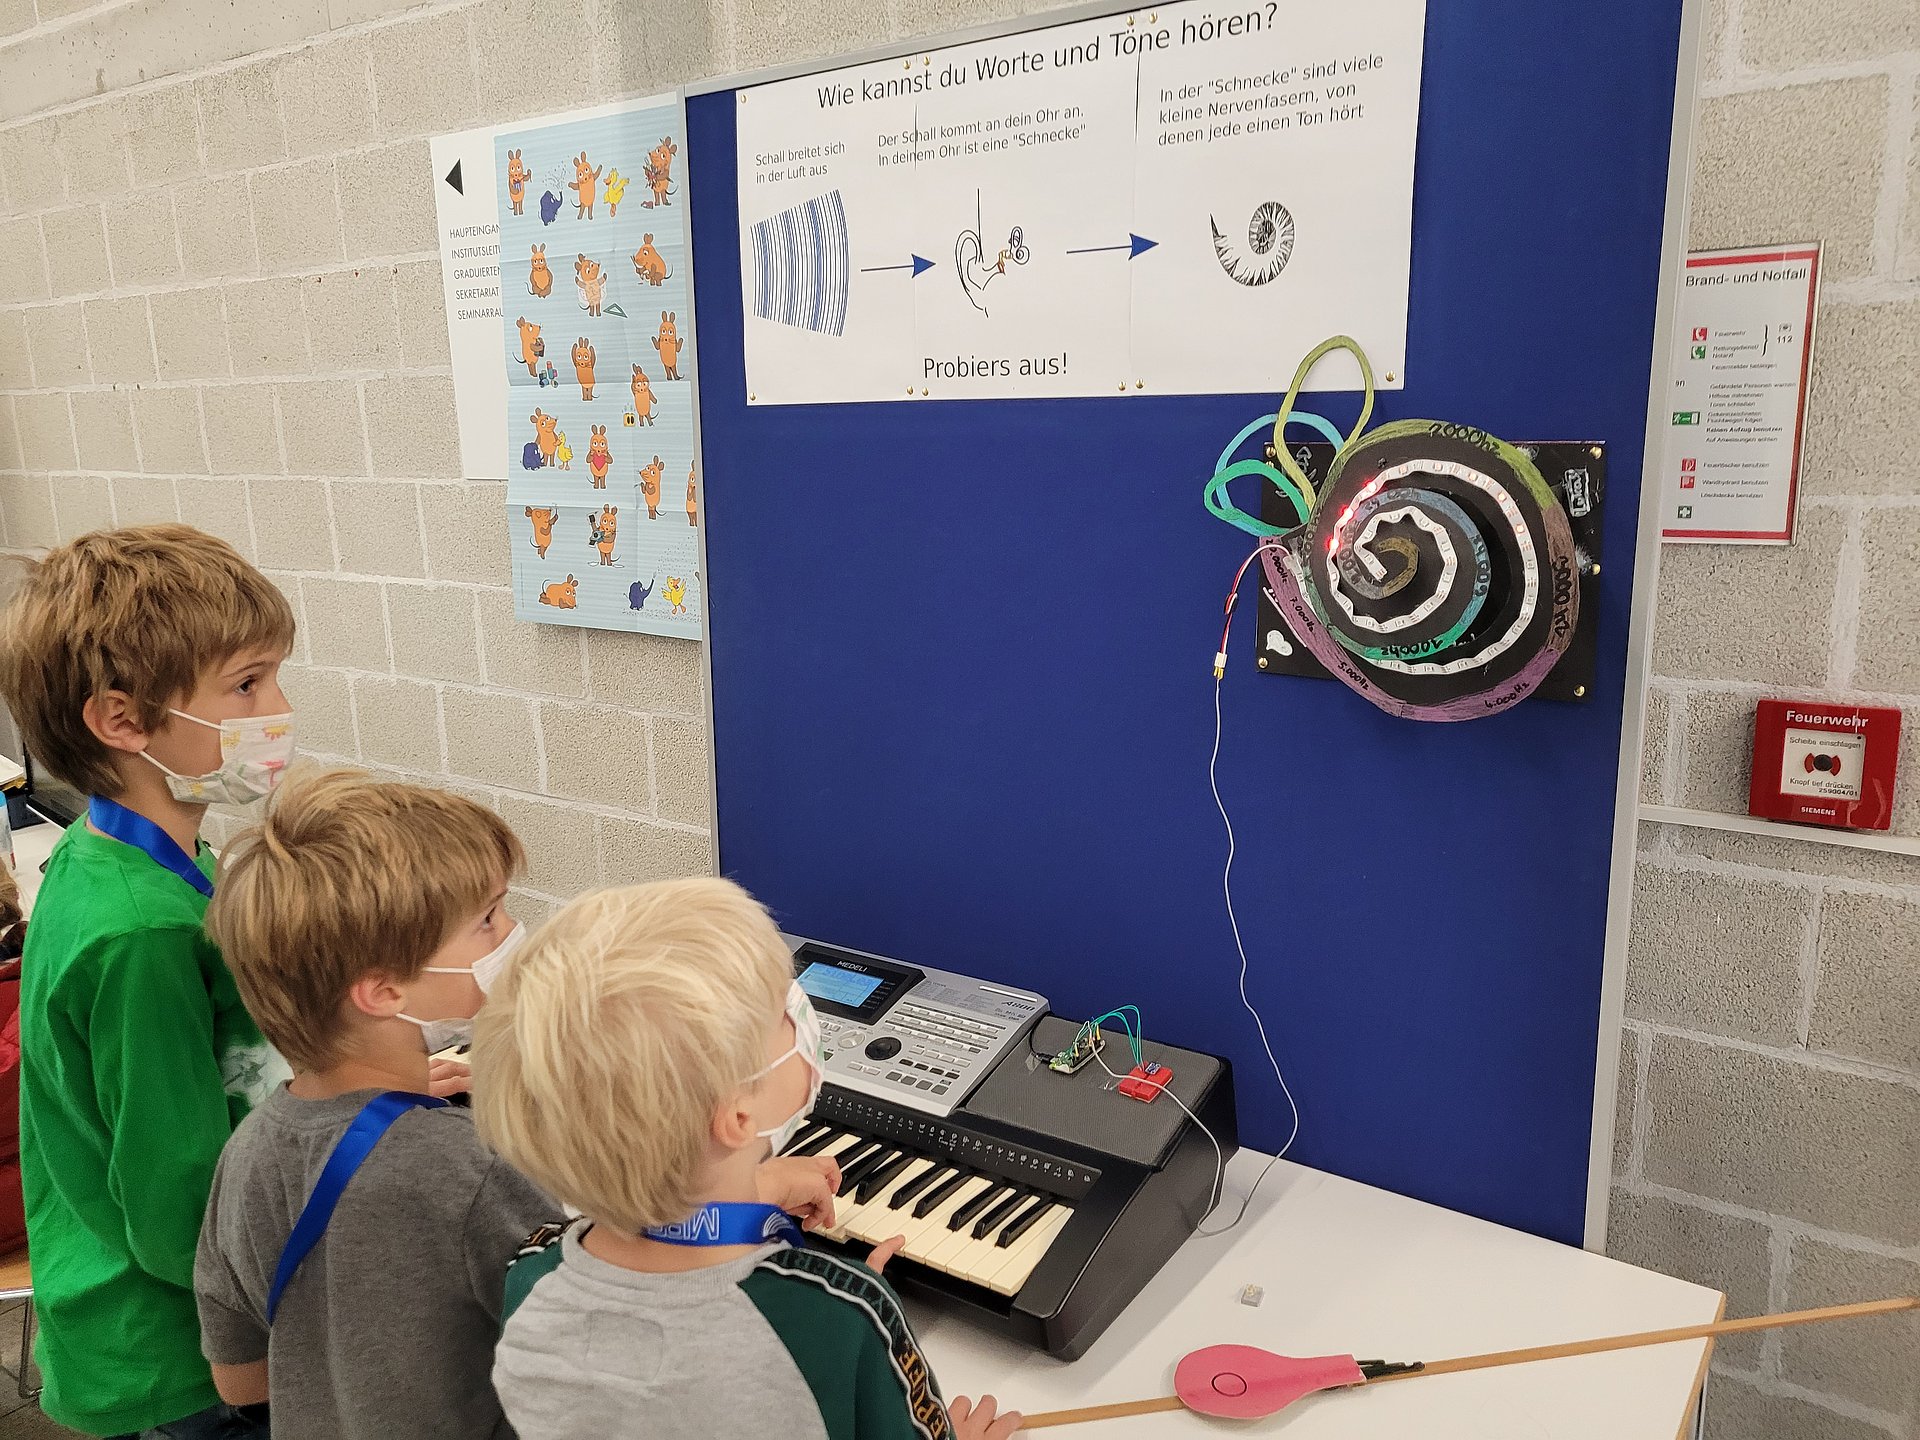 Children wearing masks and lanyards standing at a keyboard. The keyboard is connected to a large model of the human auditory system. The model consists of LED strips of different colors.